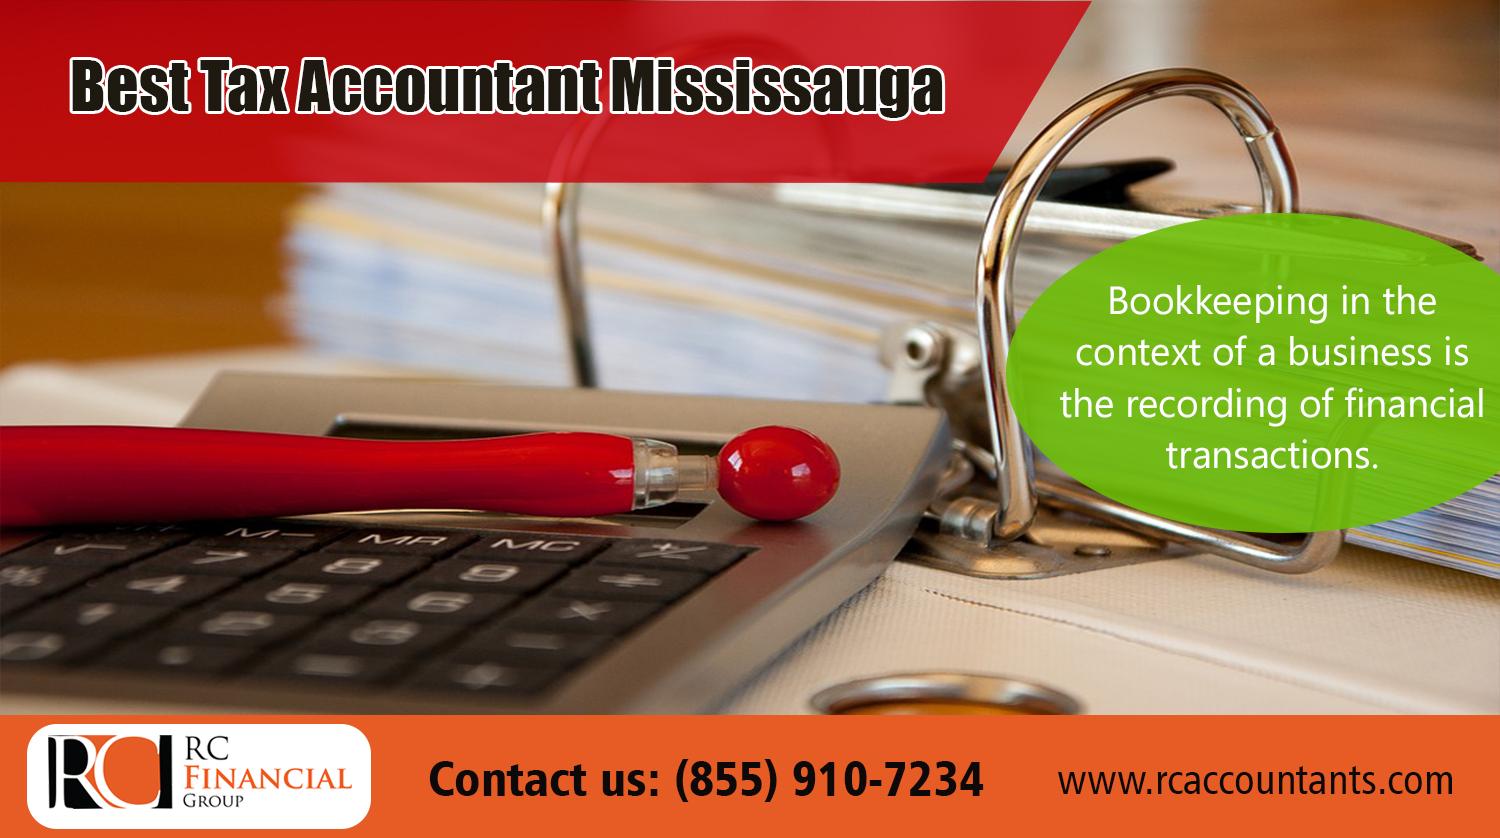 Best Tax Accountant Mississauga| http://www.rcaccountants.com/| +1 855-910-7234